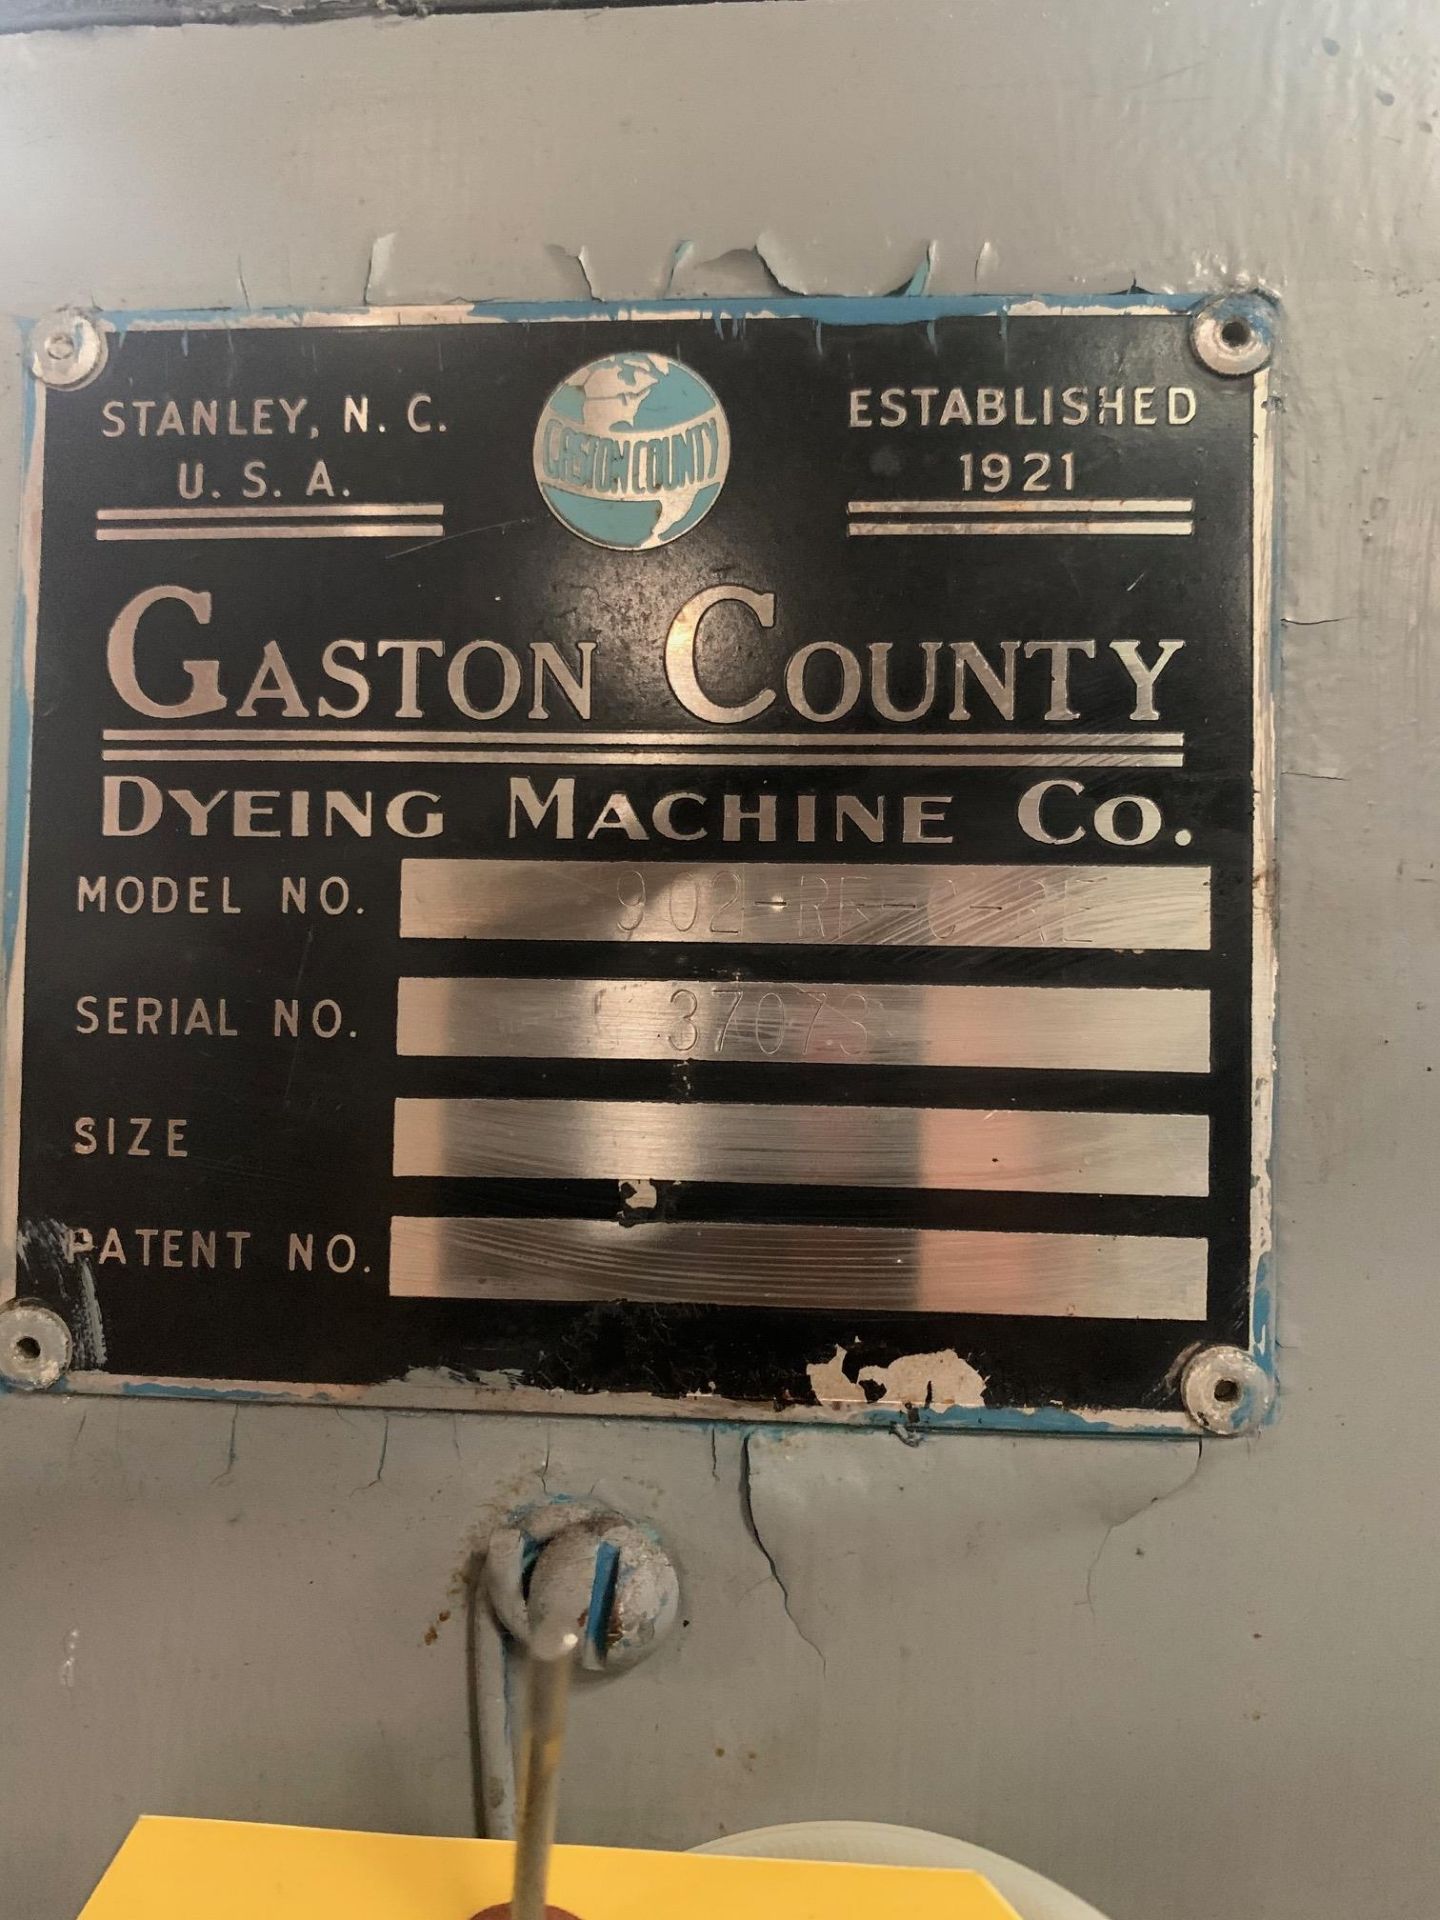 Gaston County Dyeing Machine, Model# 1.4414, Serial# 2.21.89, Working Width 6", 2 HP, 575V, Rigging - Image 2 of 9